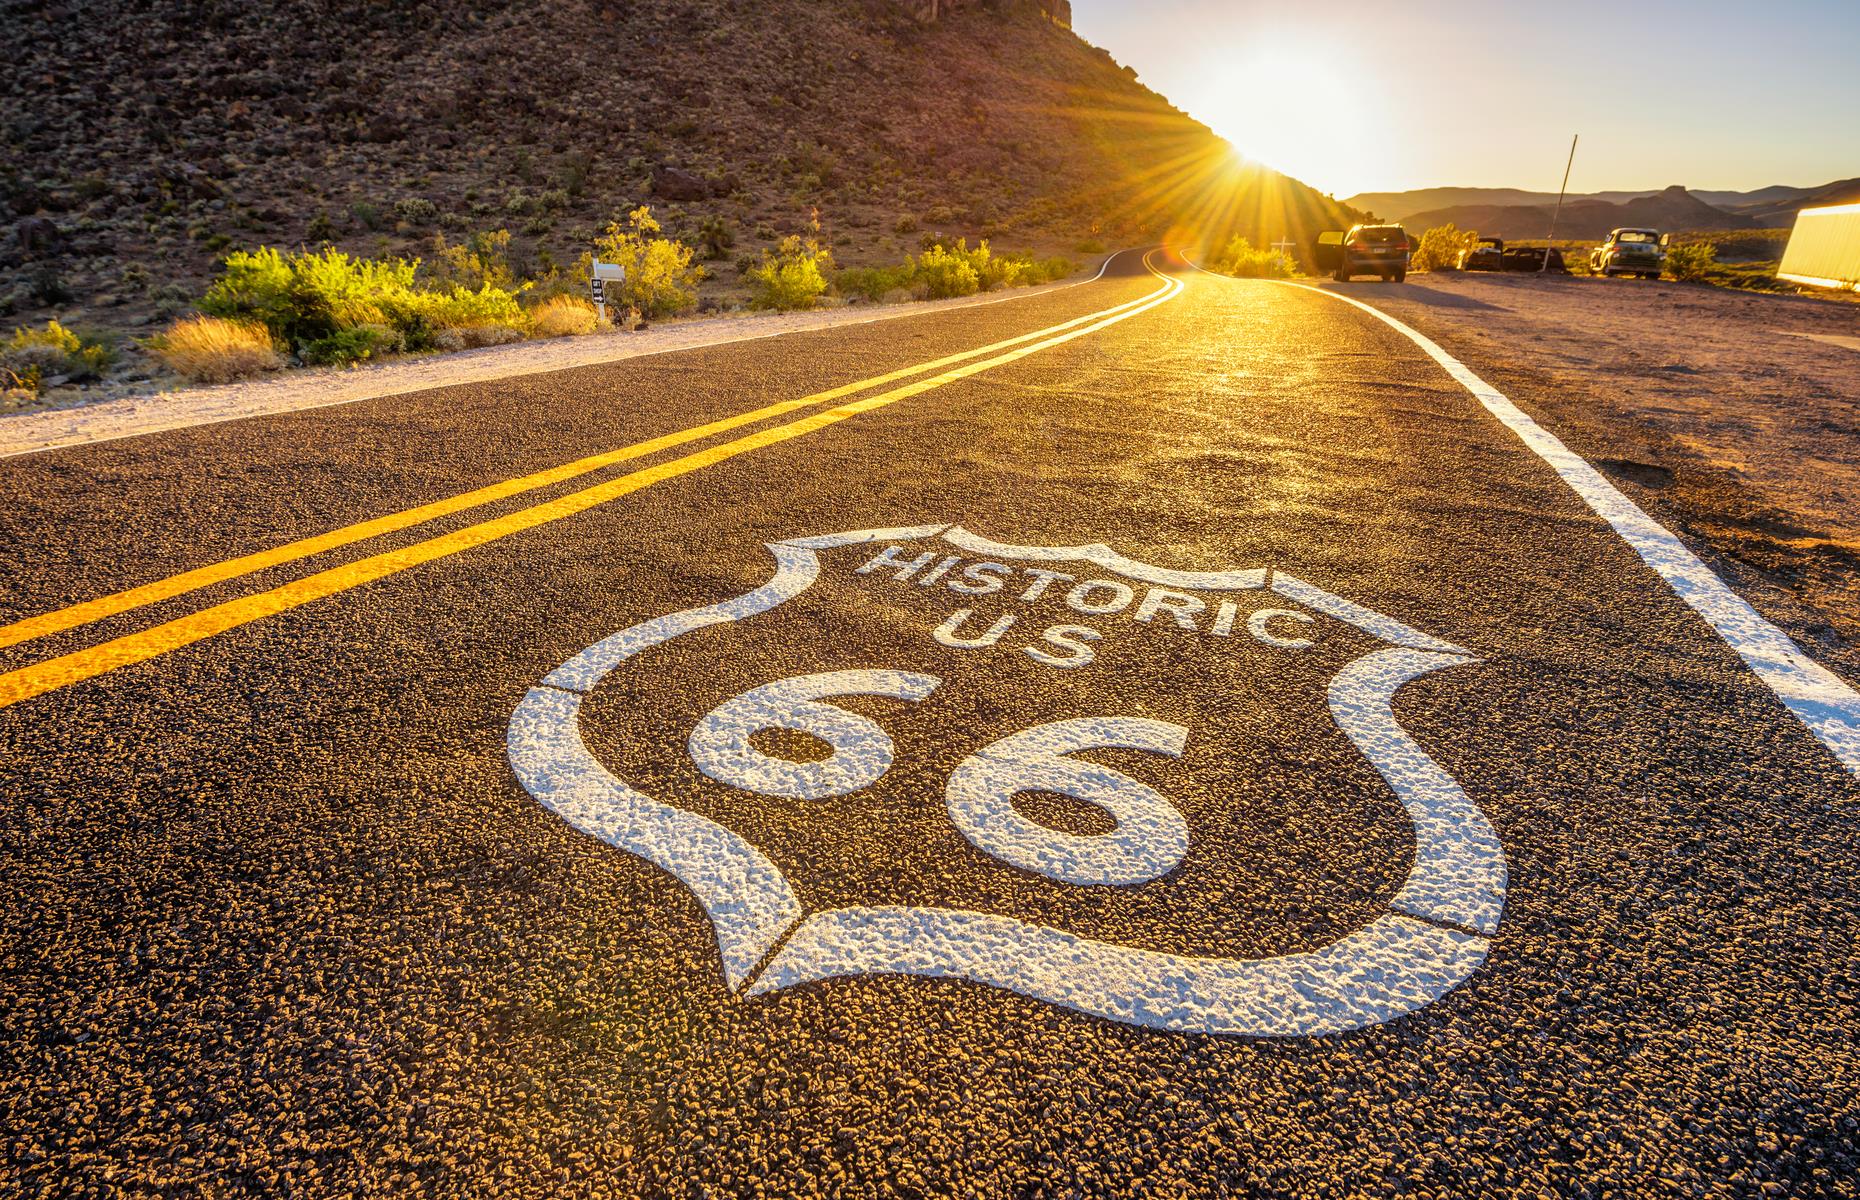 <p>Road trips don’t come more iconic than <a href="https://www.nps.gov/nr/travel/route66/maps66.html">Route 66</a>, which makes its way from Santa Monica in California to Chicago, Illinois. A total of 2,448 miles (3,940km) weave, wind, rise and dip through states including Arizona, New Mexico and Oklahoma, and you can get your kicks pretty much anywhere thanks to roadside diners, kitsch art installations and sculptures. When it skims the Mojave Desert, though, you won’t be able to tear your eyes off the road. Try our <a href="https://www.loveexploring.com/guides/88561/route-66-in-three-days-the-ultimate-easy-road-trip-planner">three-day itinerary</a>.</p>